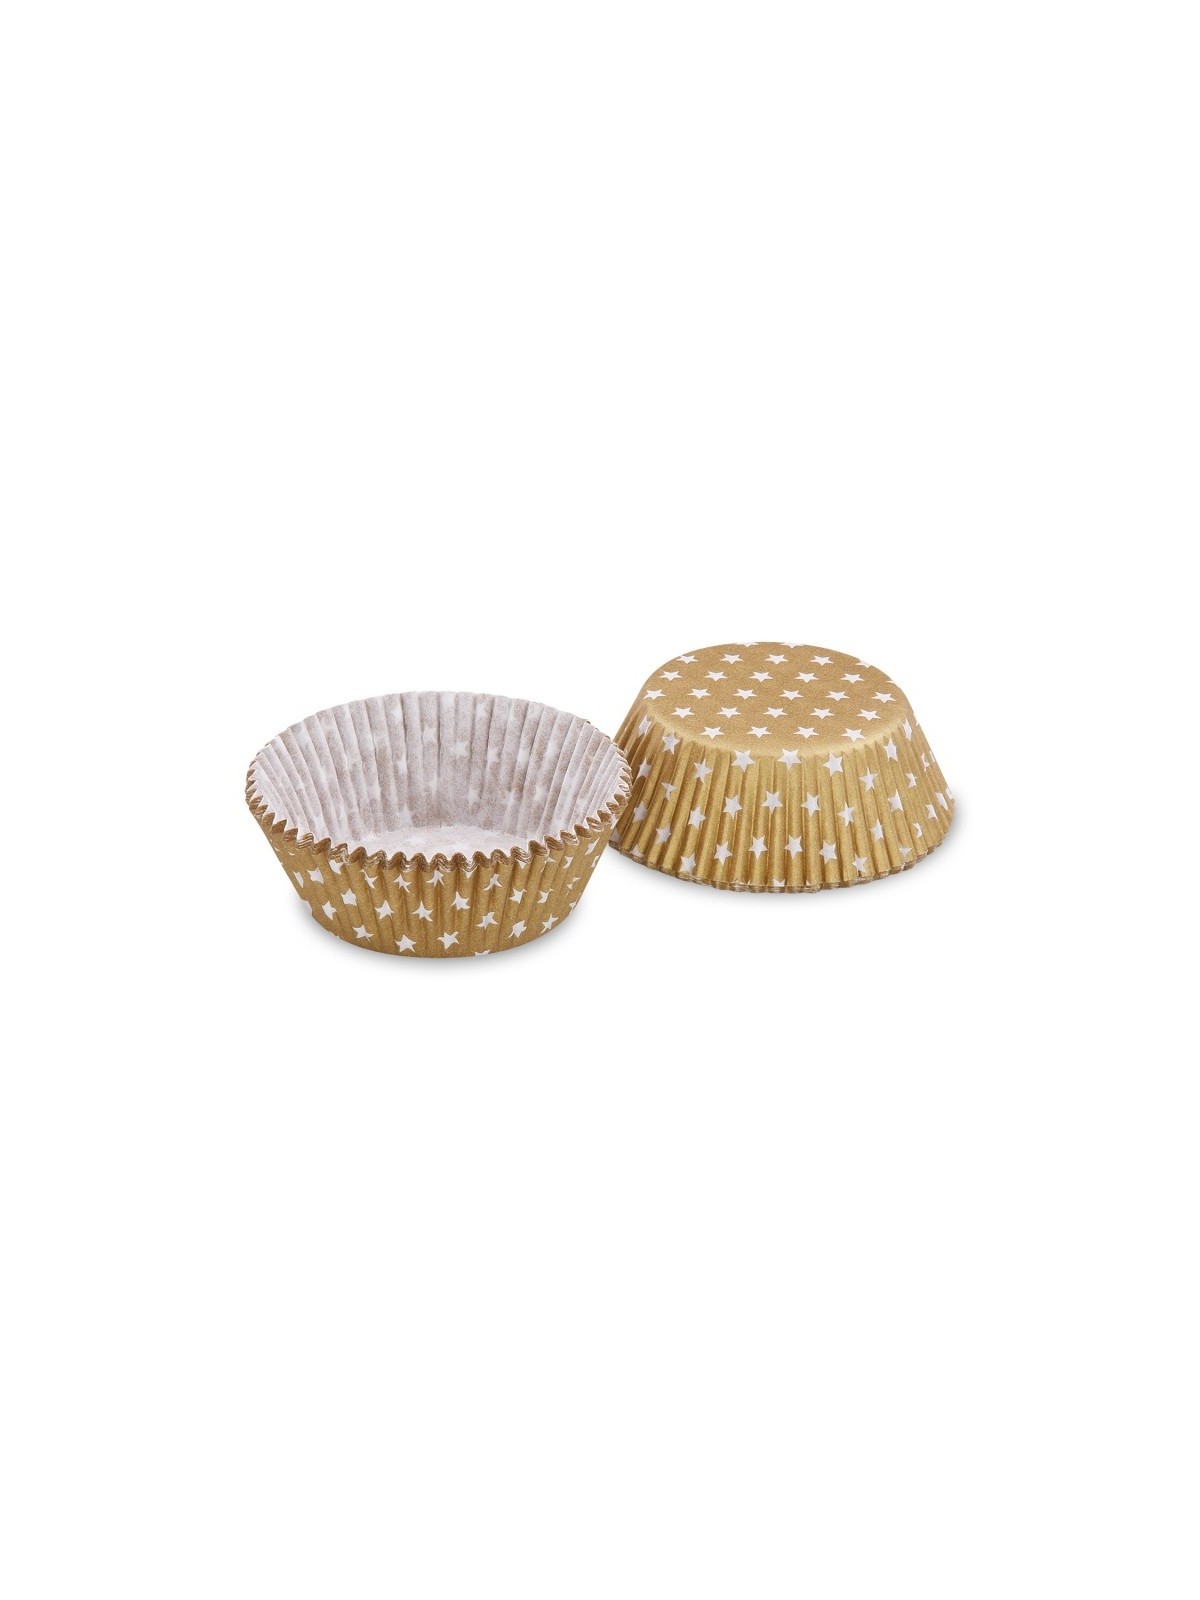 Baking Cups - gold star - 40pieces